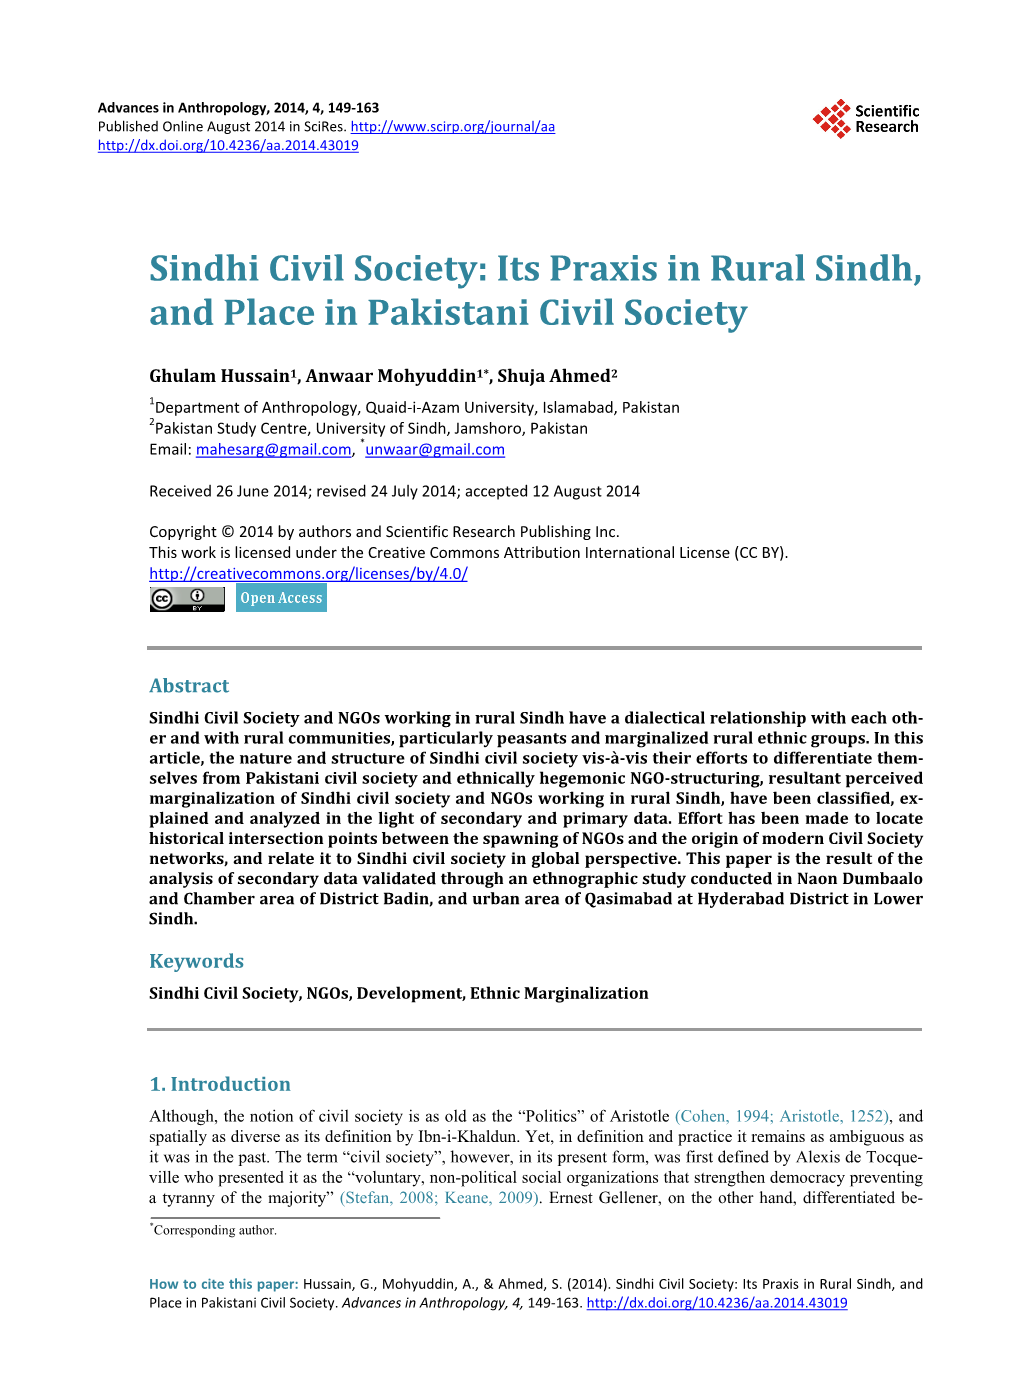 Sindhi Civil Society: Its Praxis in Rural Sindh, and Place in Pakistani Civil Society